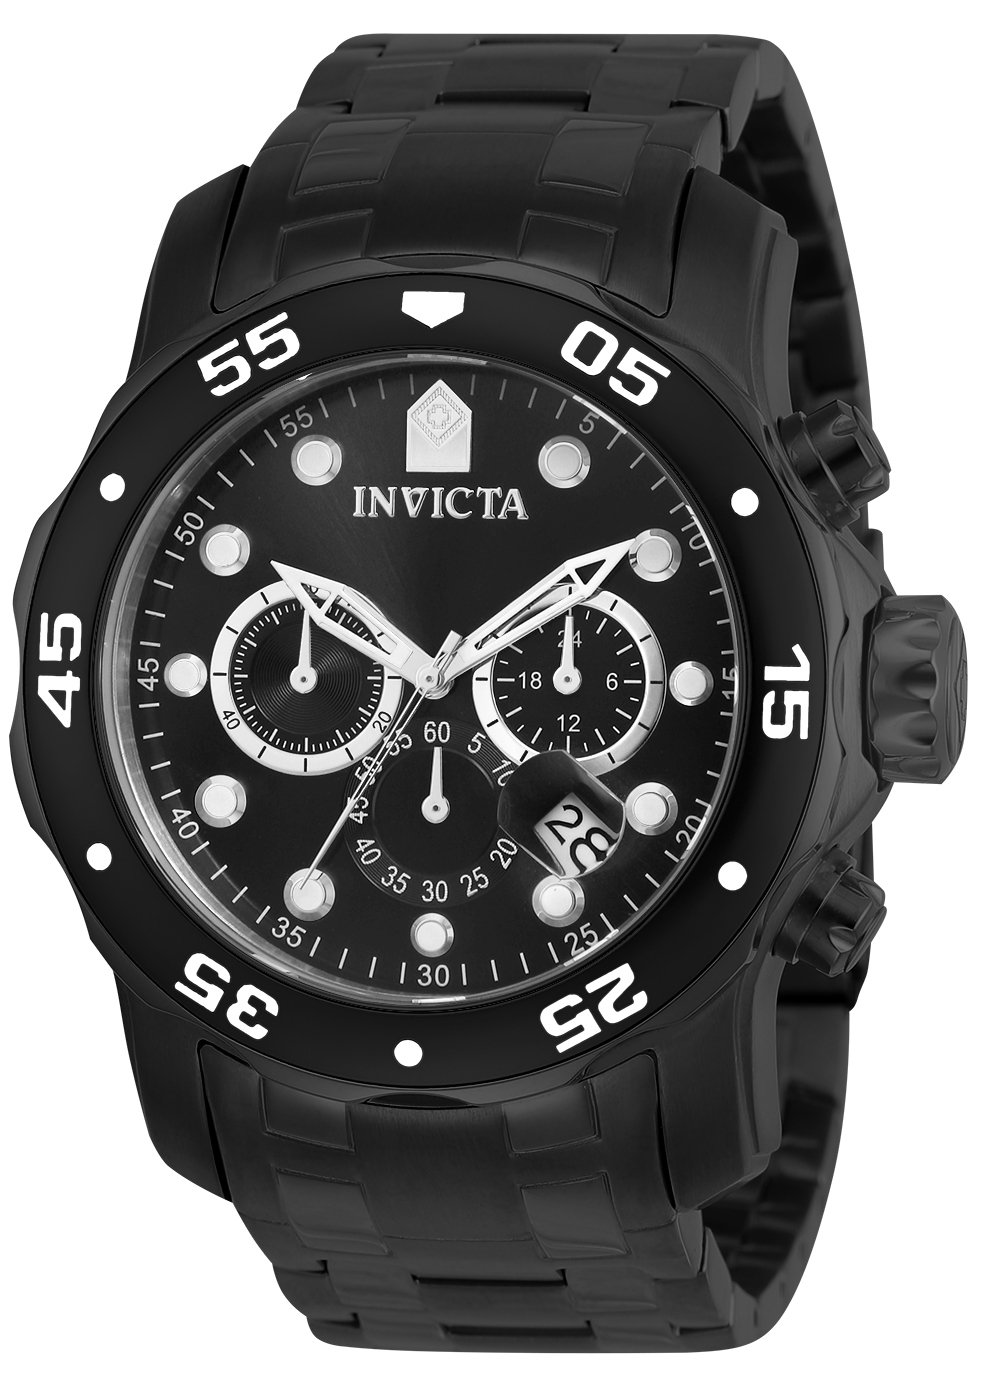 Invicta 8926OB with oyster bracelet | WatchUSeek Watch Forums